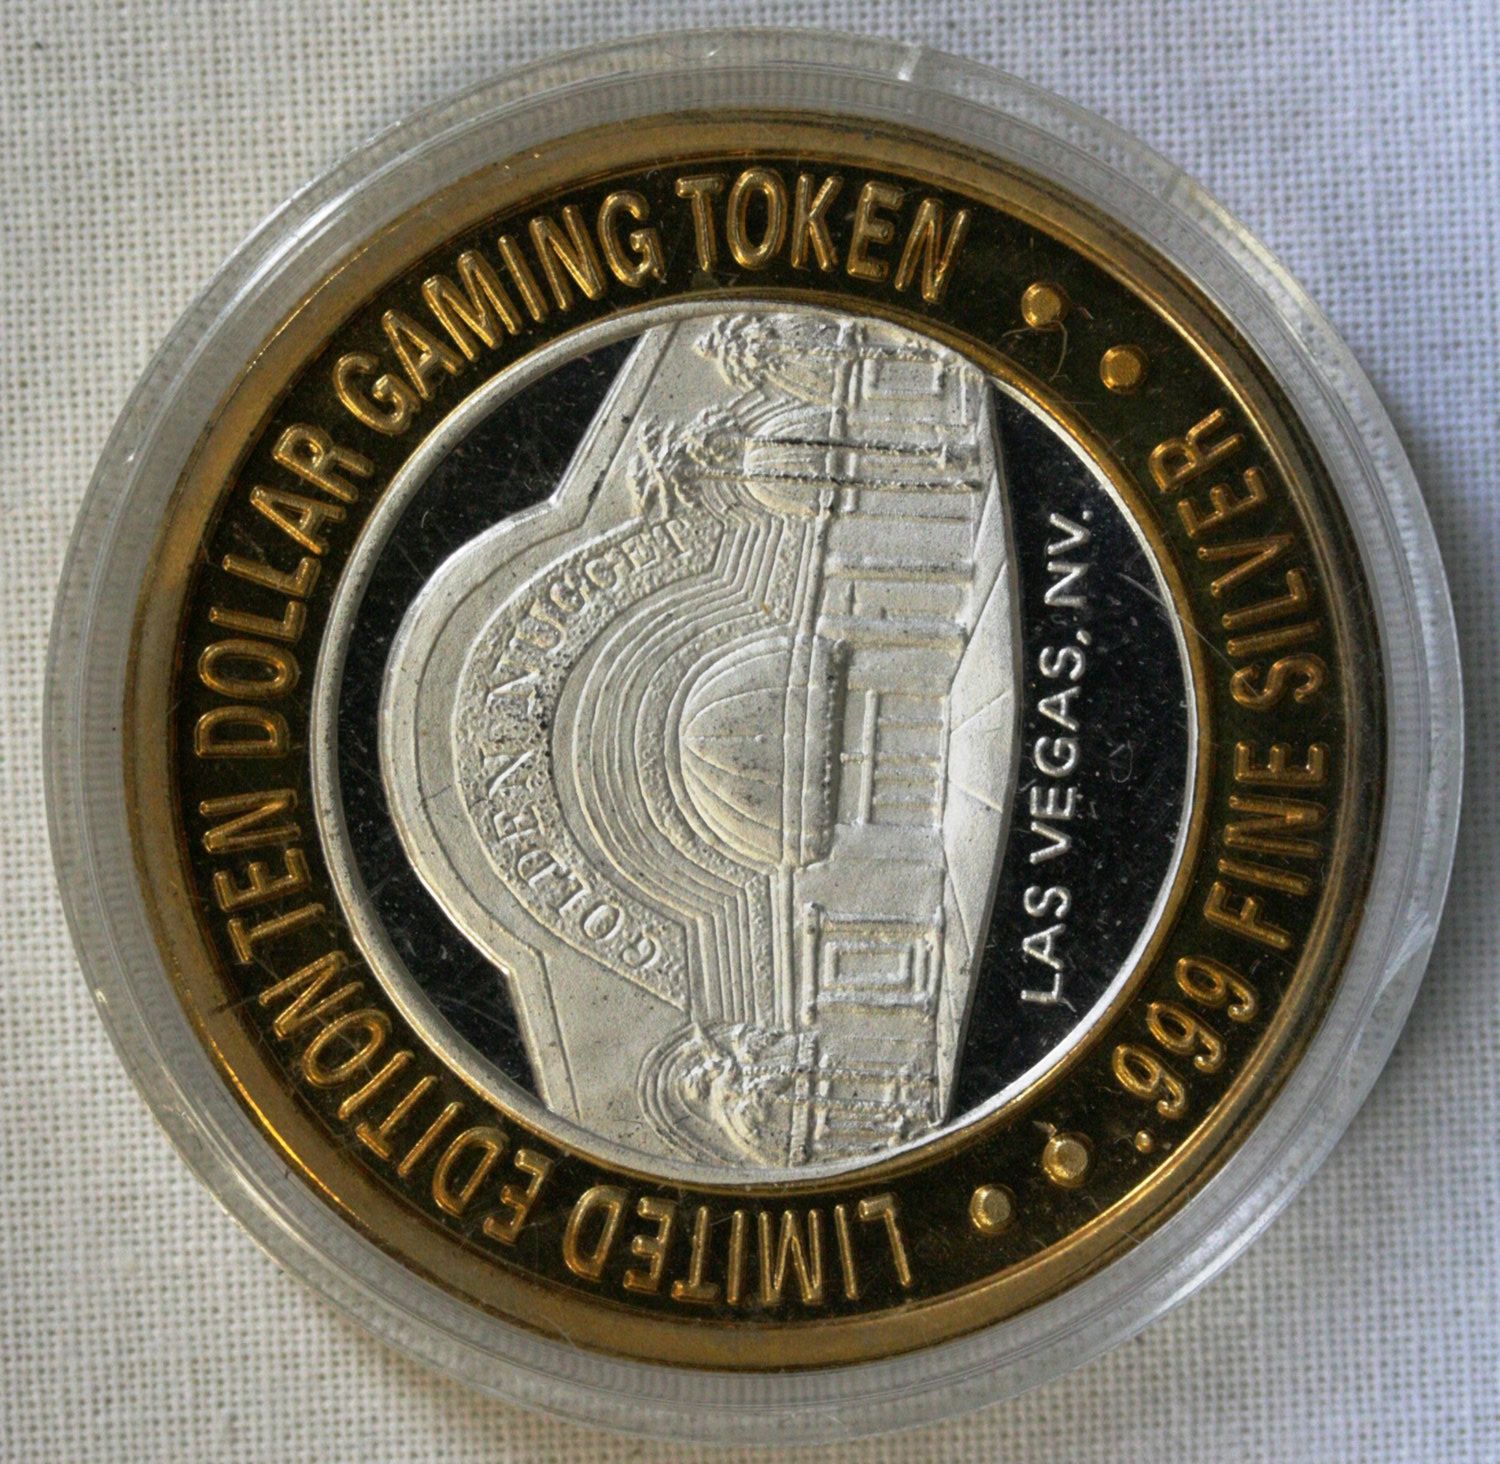 Limited edition 10 dollar gaming token golden nugget